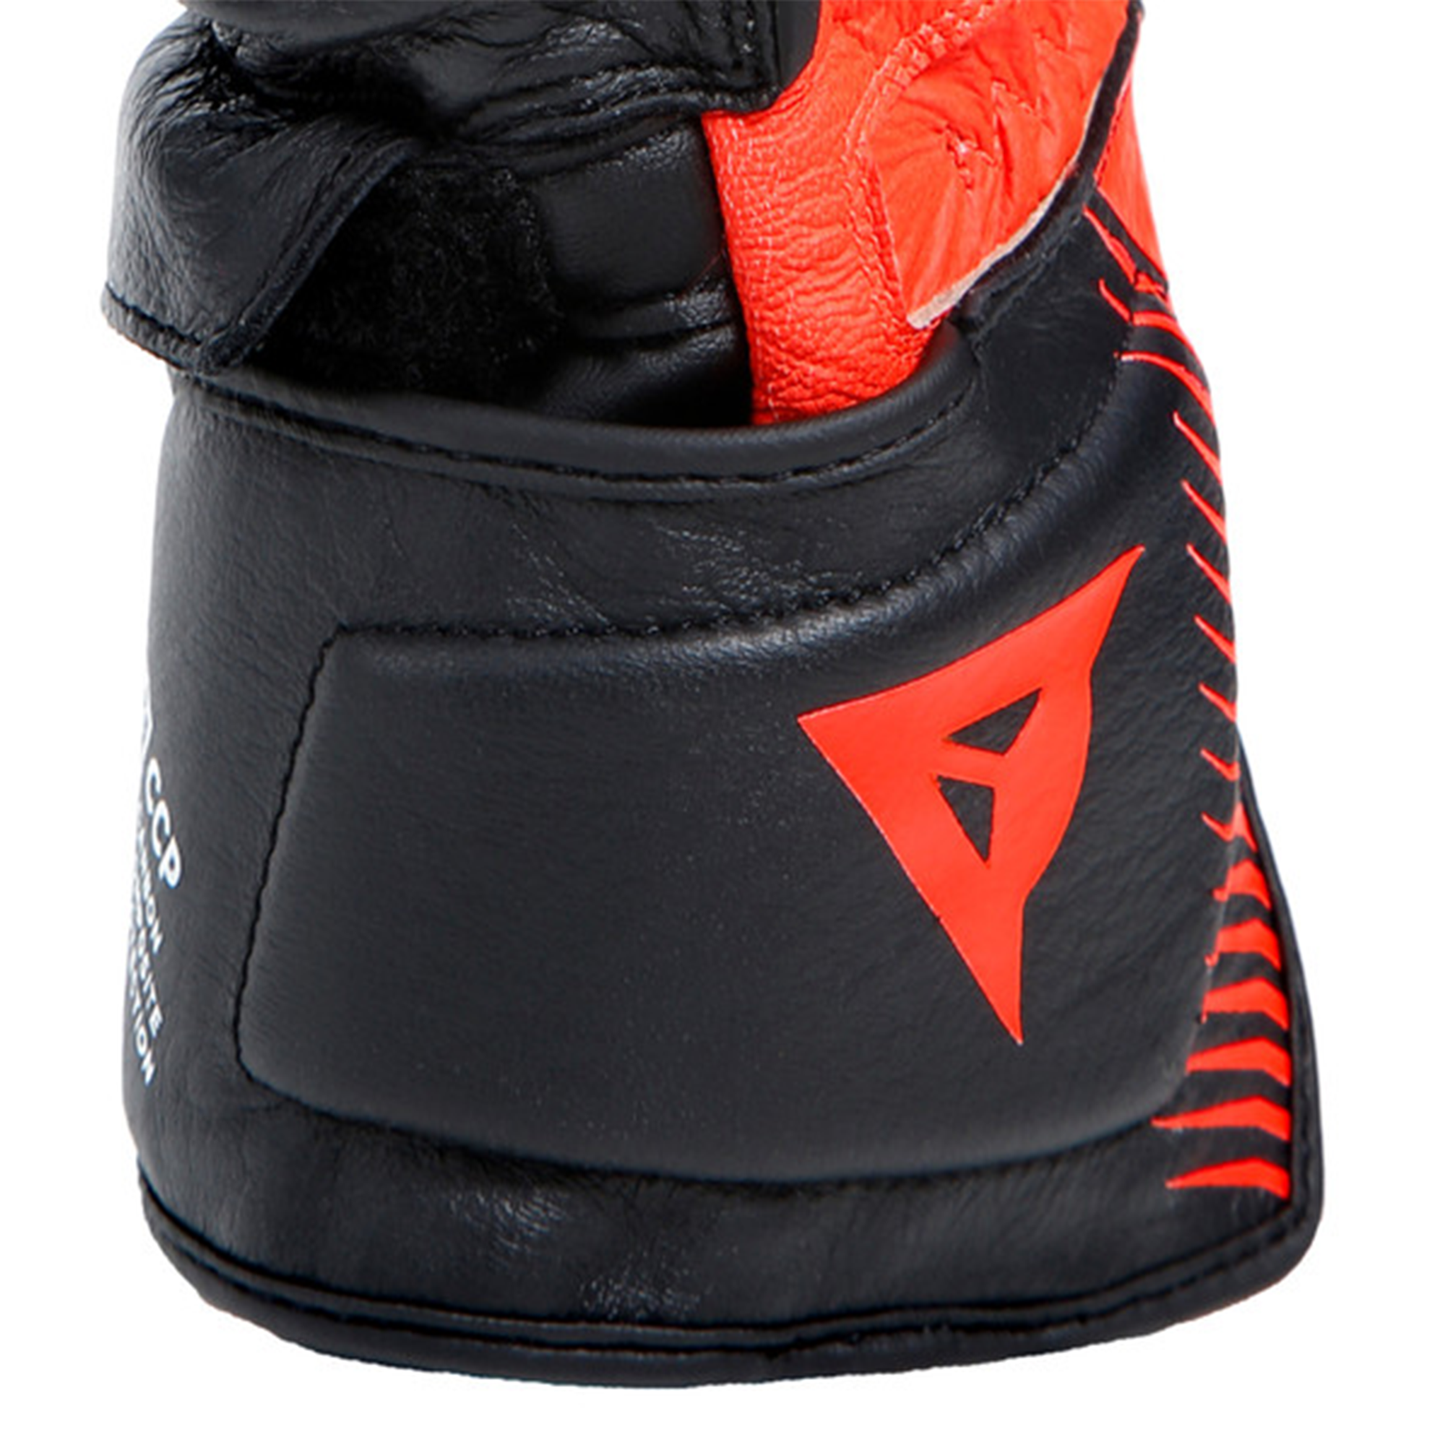 Dainese Carbon 4 Long Leather Gloves - Black/Flo Red/White (W12)